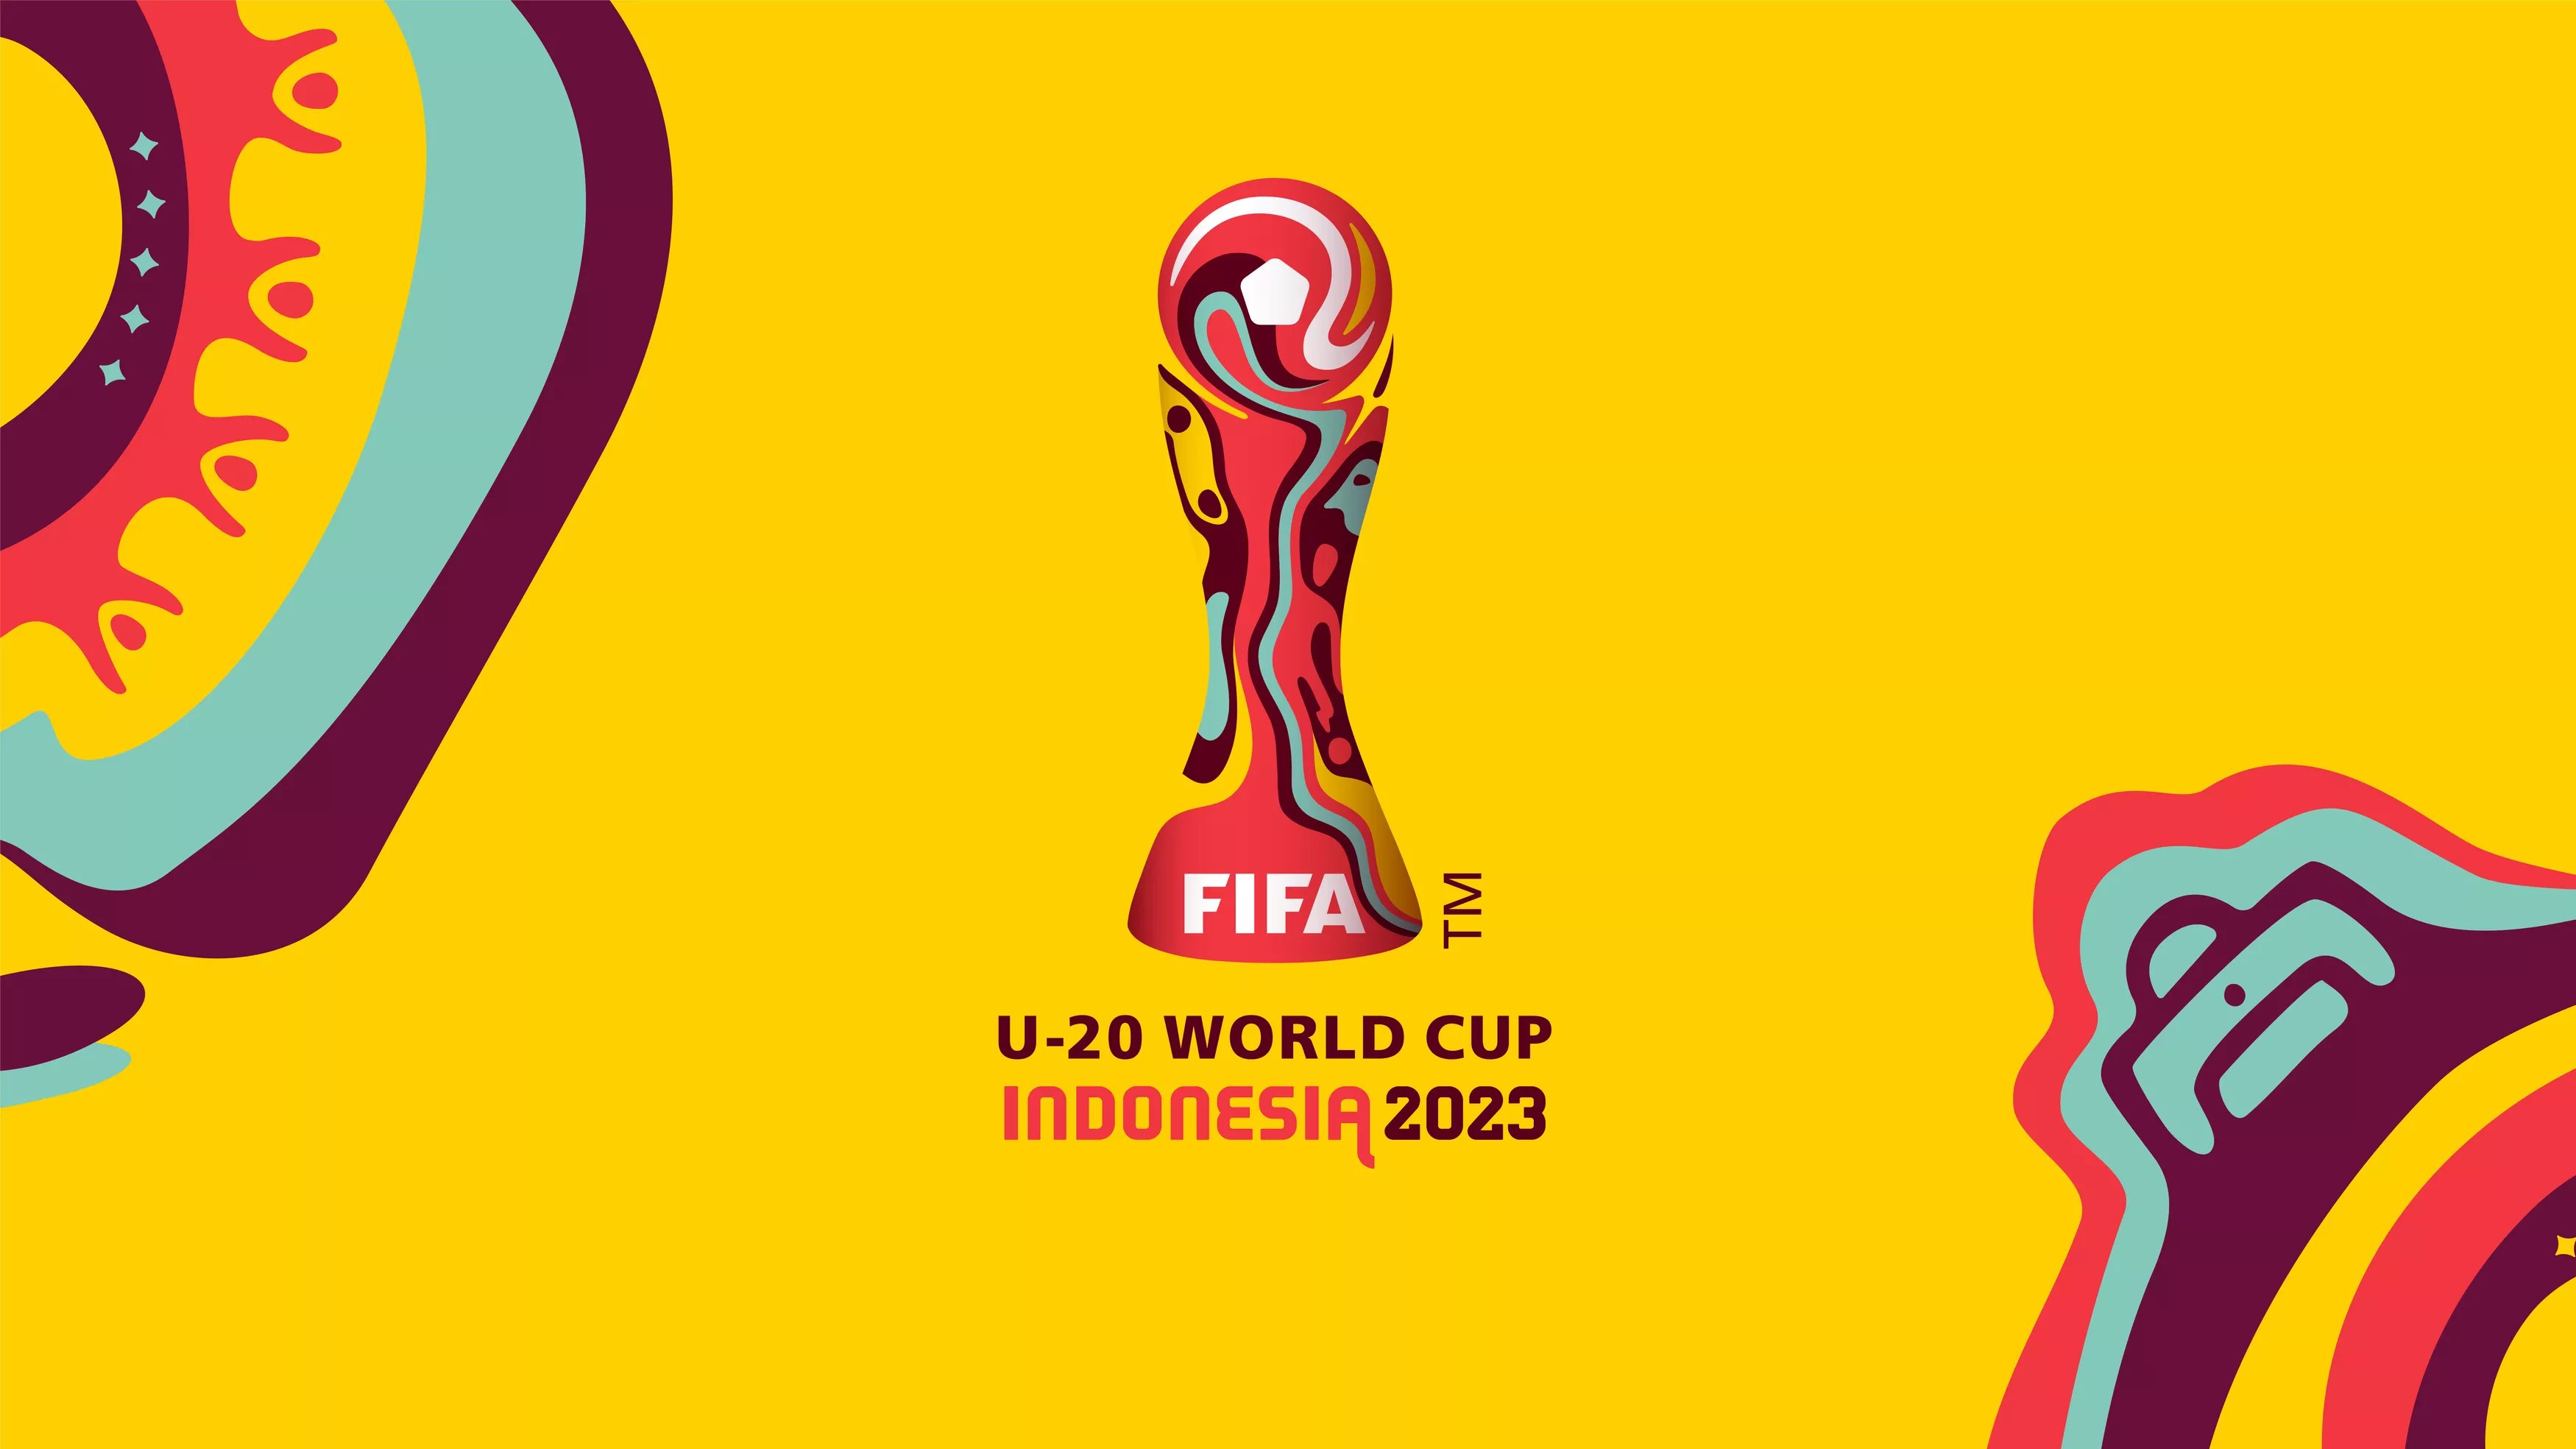 What really happened in 2023 FIFA U-20 World Cup that was to be held in Indonesia?